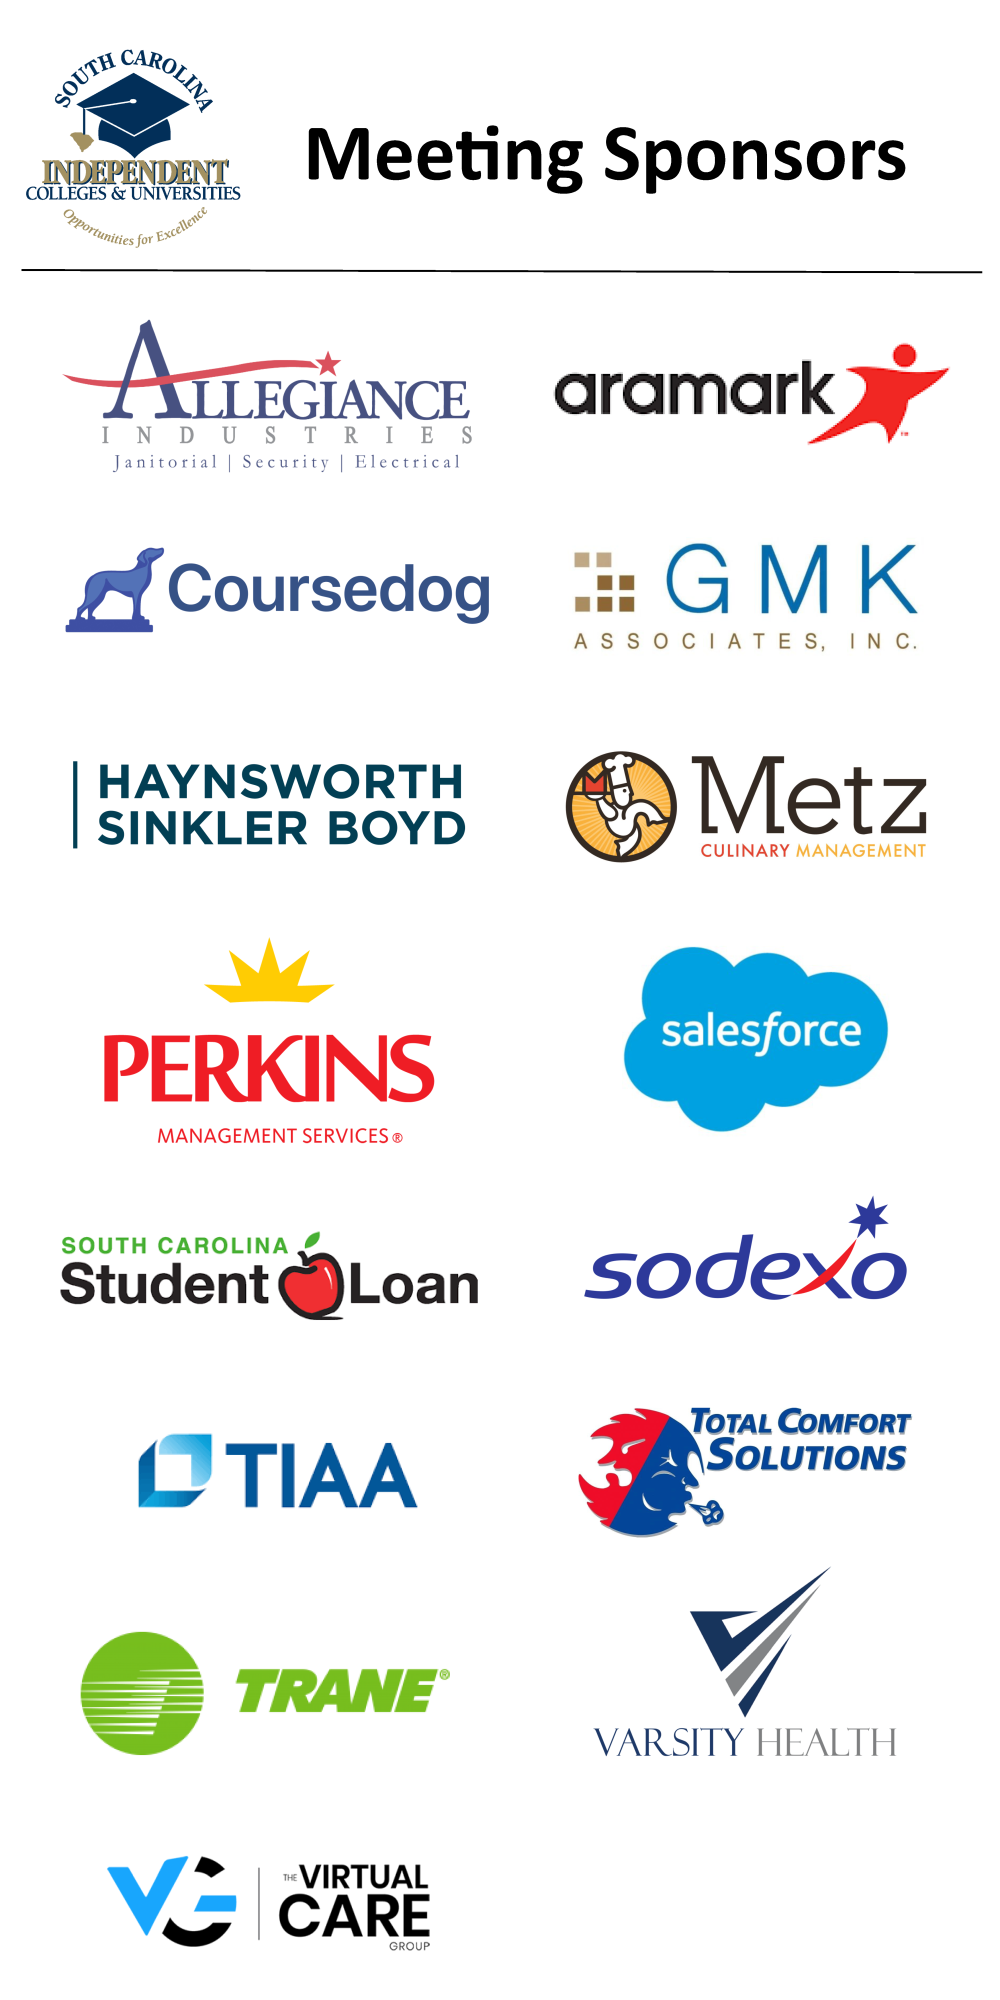 SCICU thanks its corporate sponsors for supporting the Oct. 13 board meeting at Benedict College.